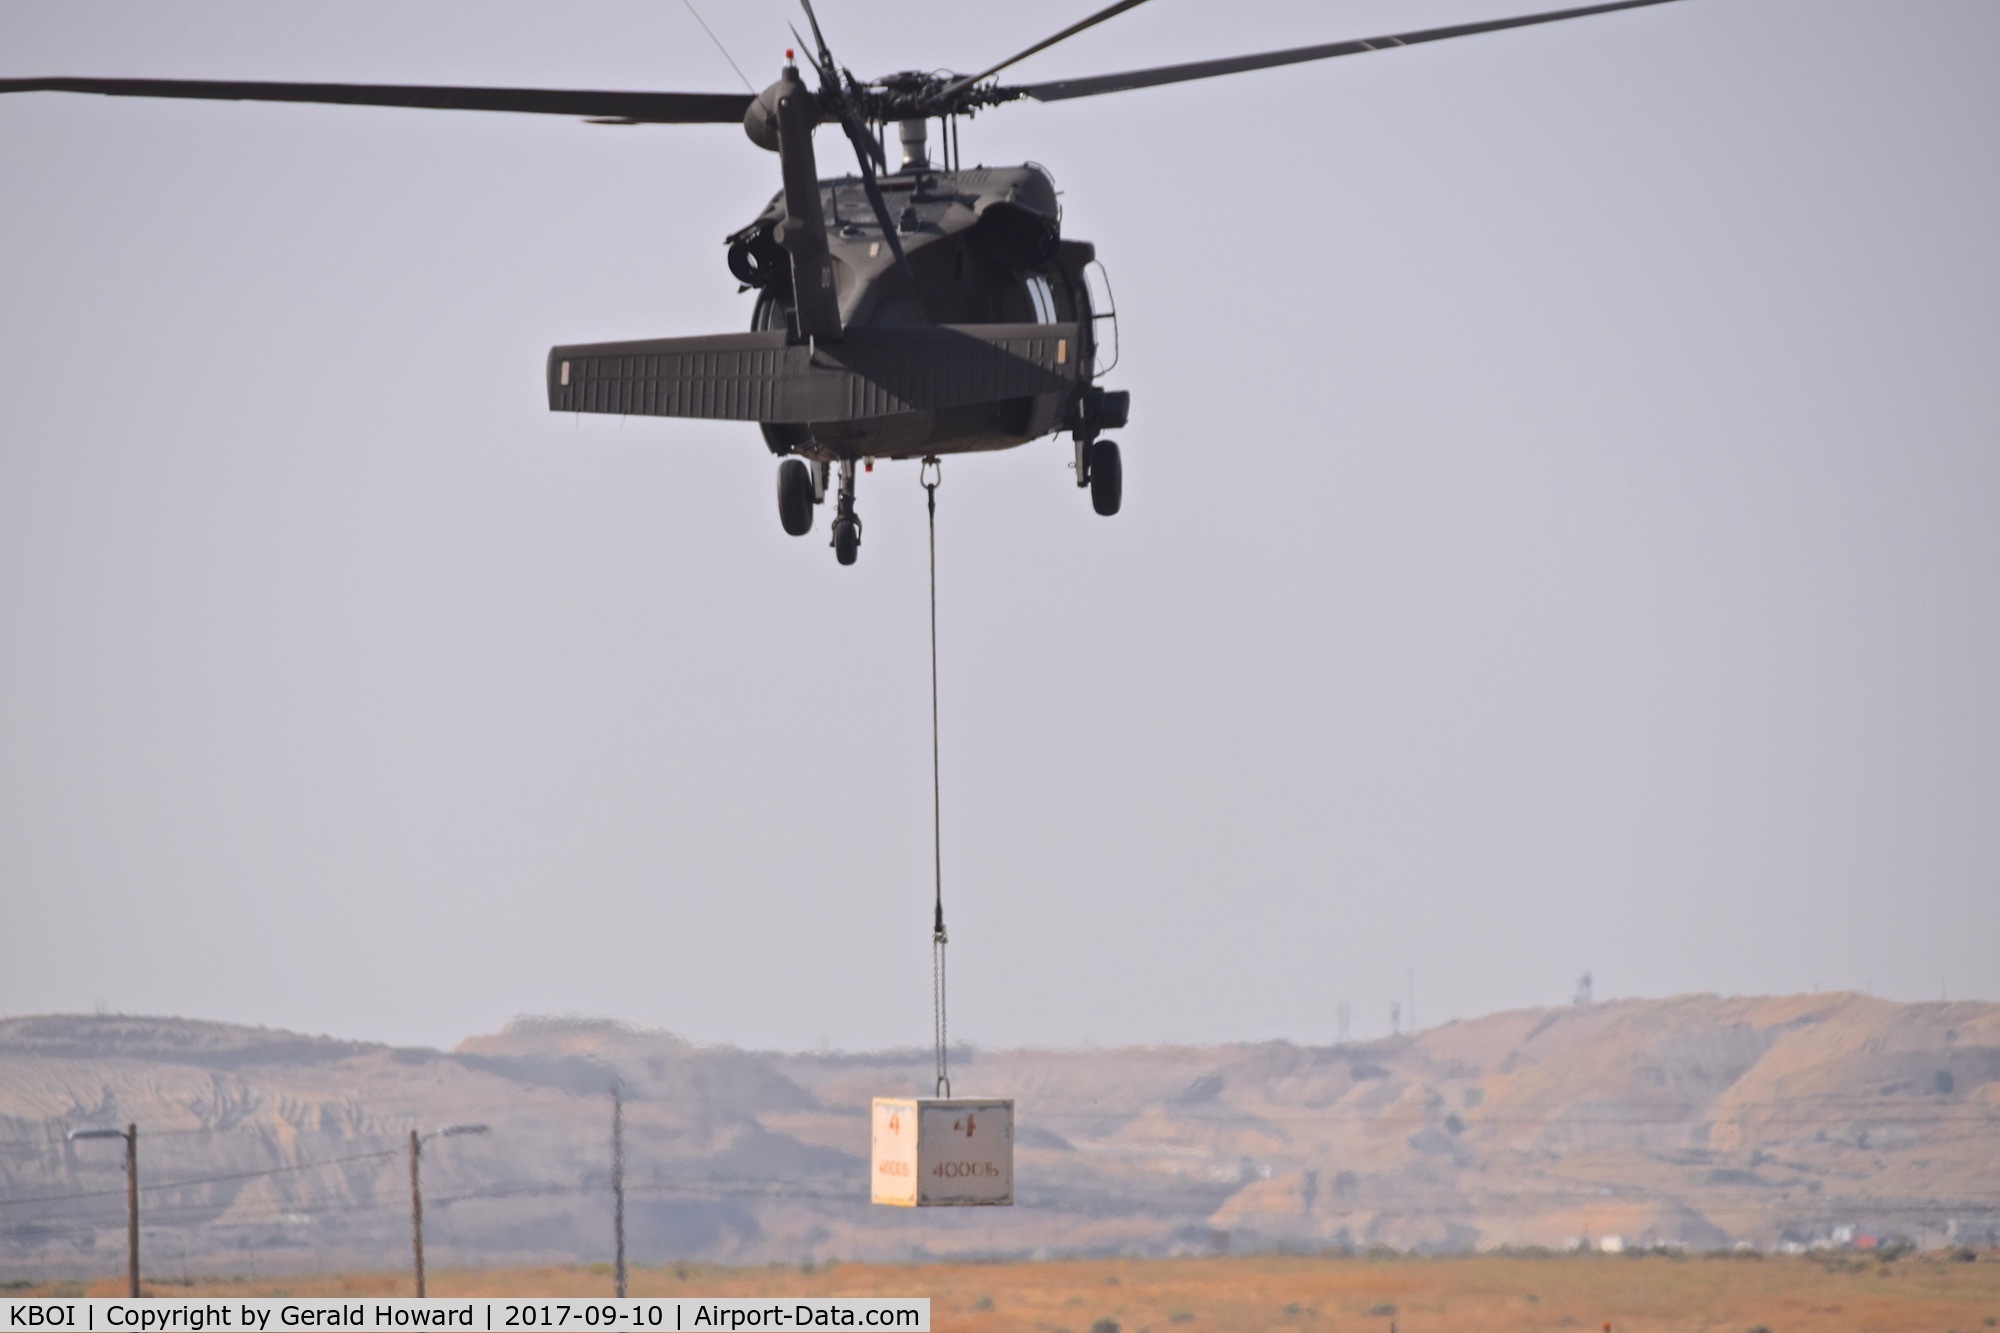 Boise Air Terminal/gowen Fld Airport (BOI) - UH-60L from the 1-183rd AVN BN, Idaho Army National Guard practicing some heavy lifting.
